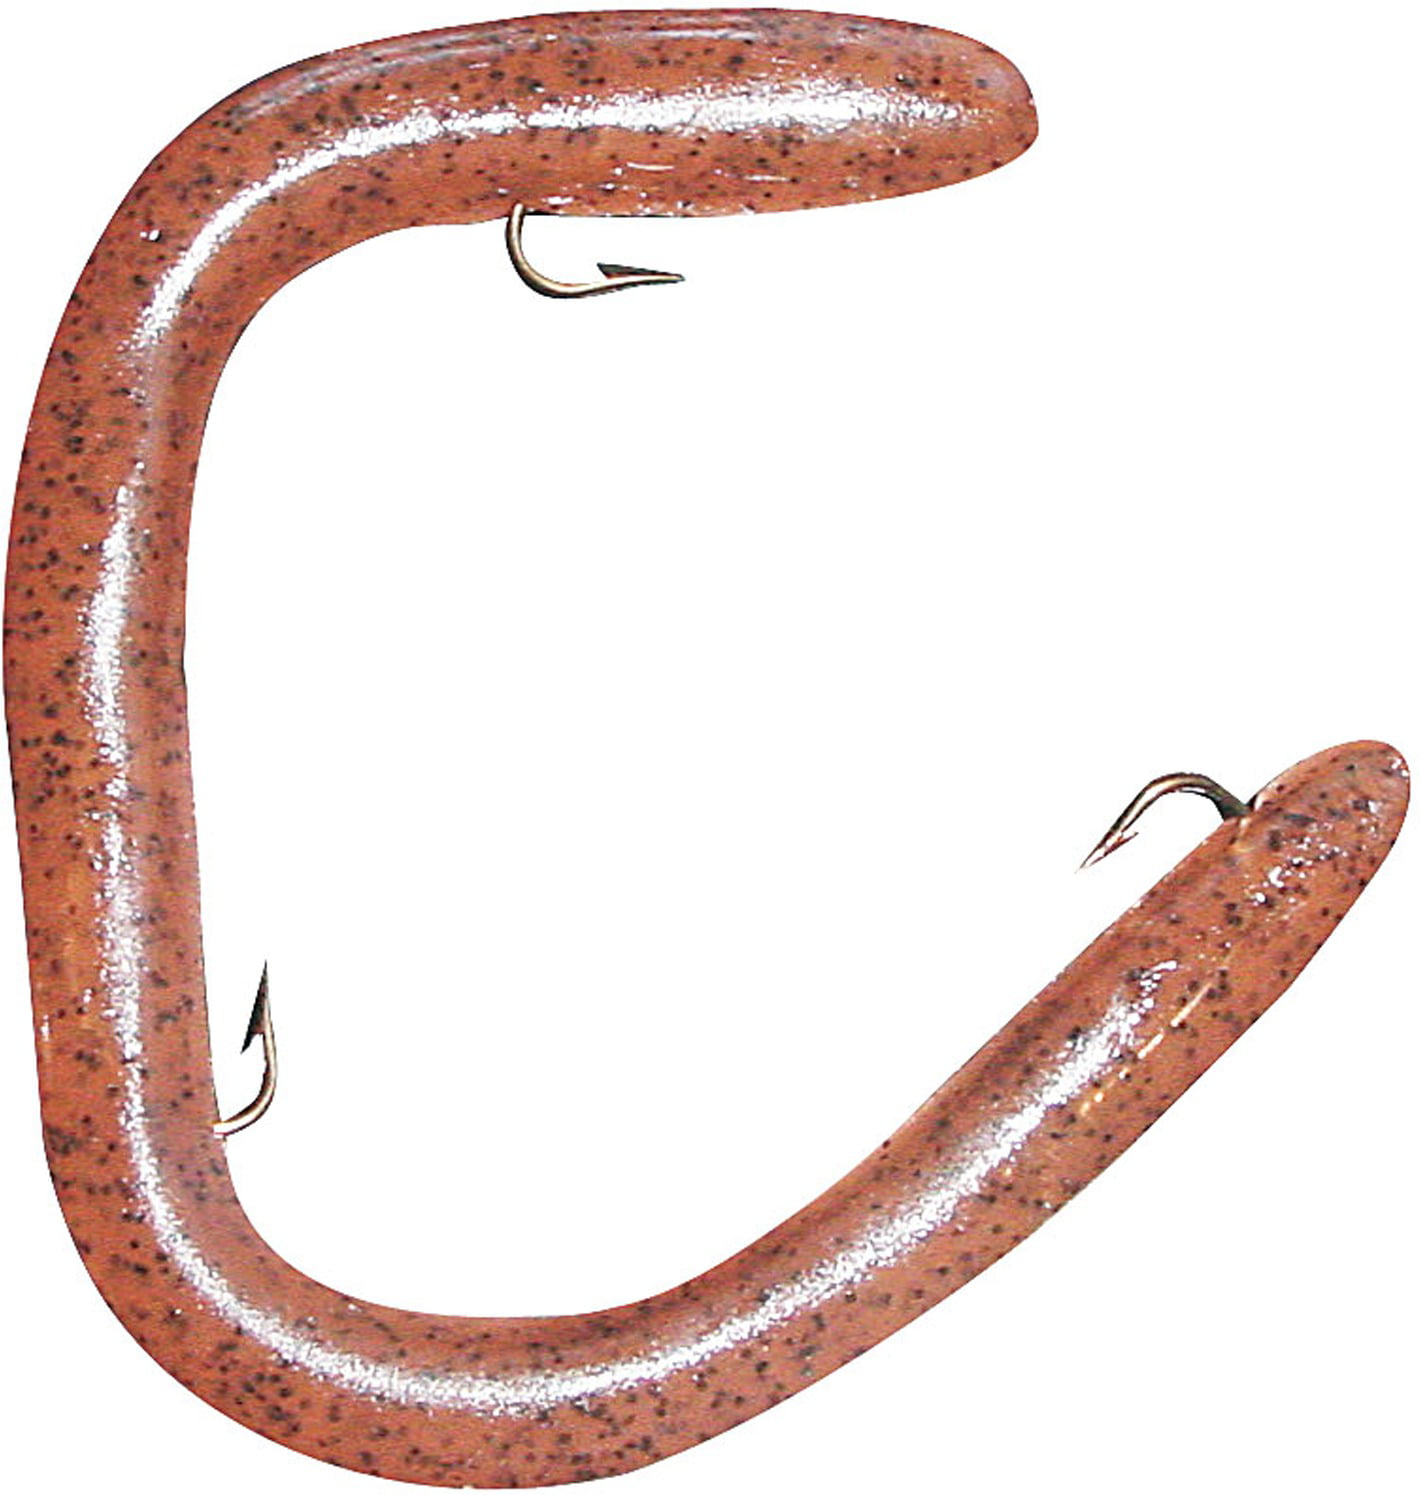 Details about   3pks Of 15-field and stream Fishing  Hot Worms 3.5” Soft Baits Yellow 78648